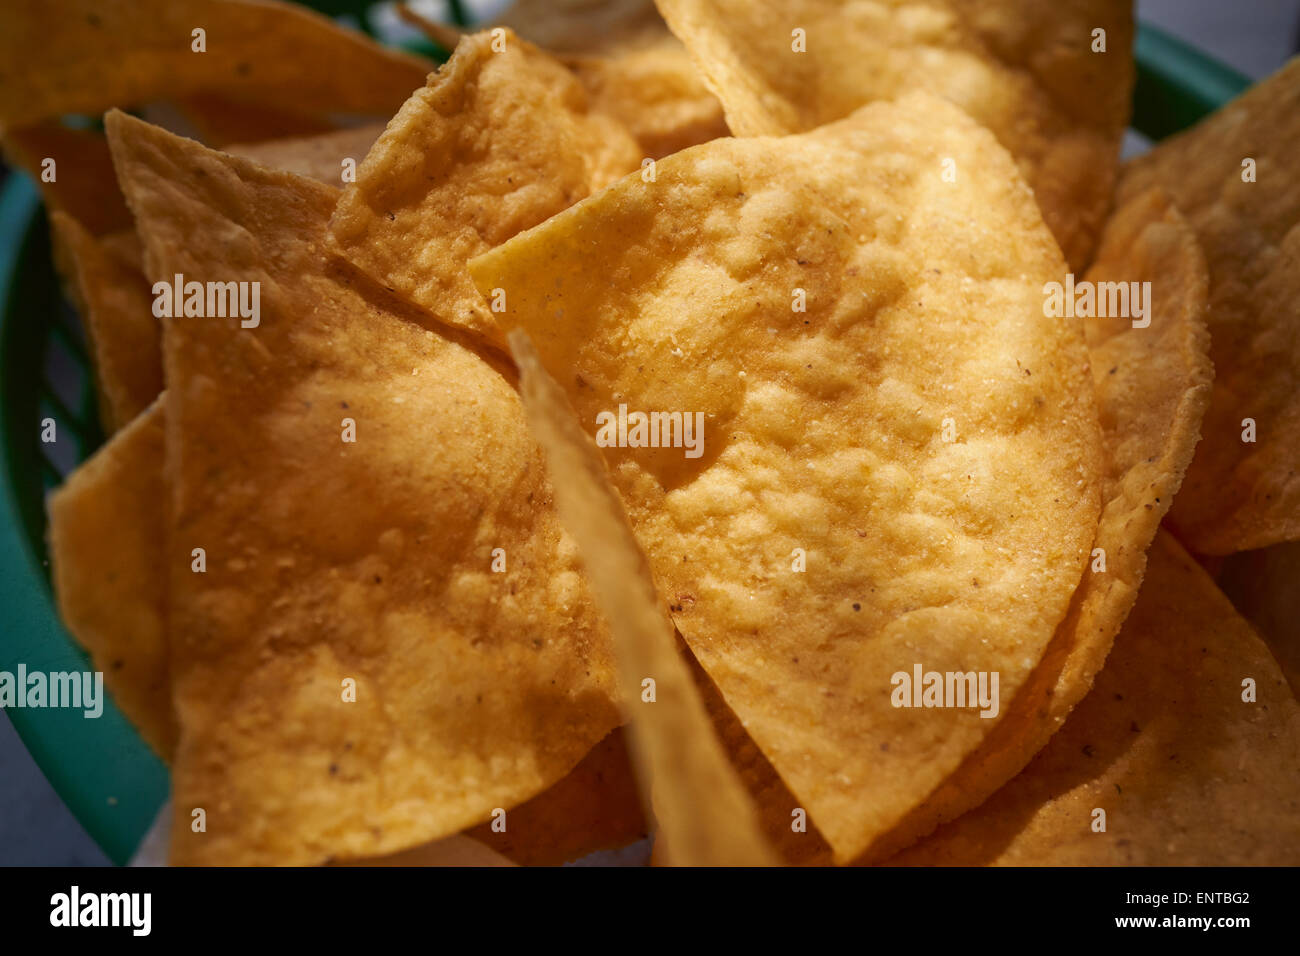 A basket of tortilla chips. Typical American Mexican restaurant preparation. Stock Photo